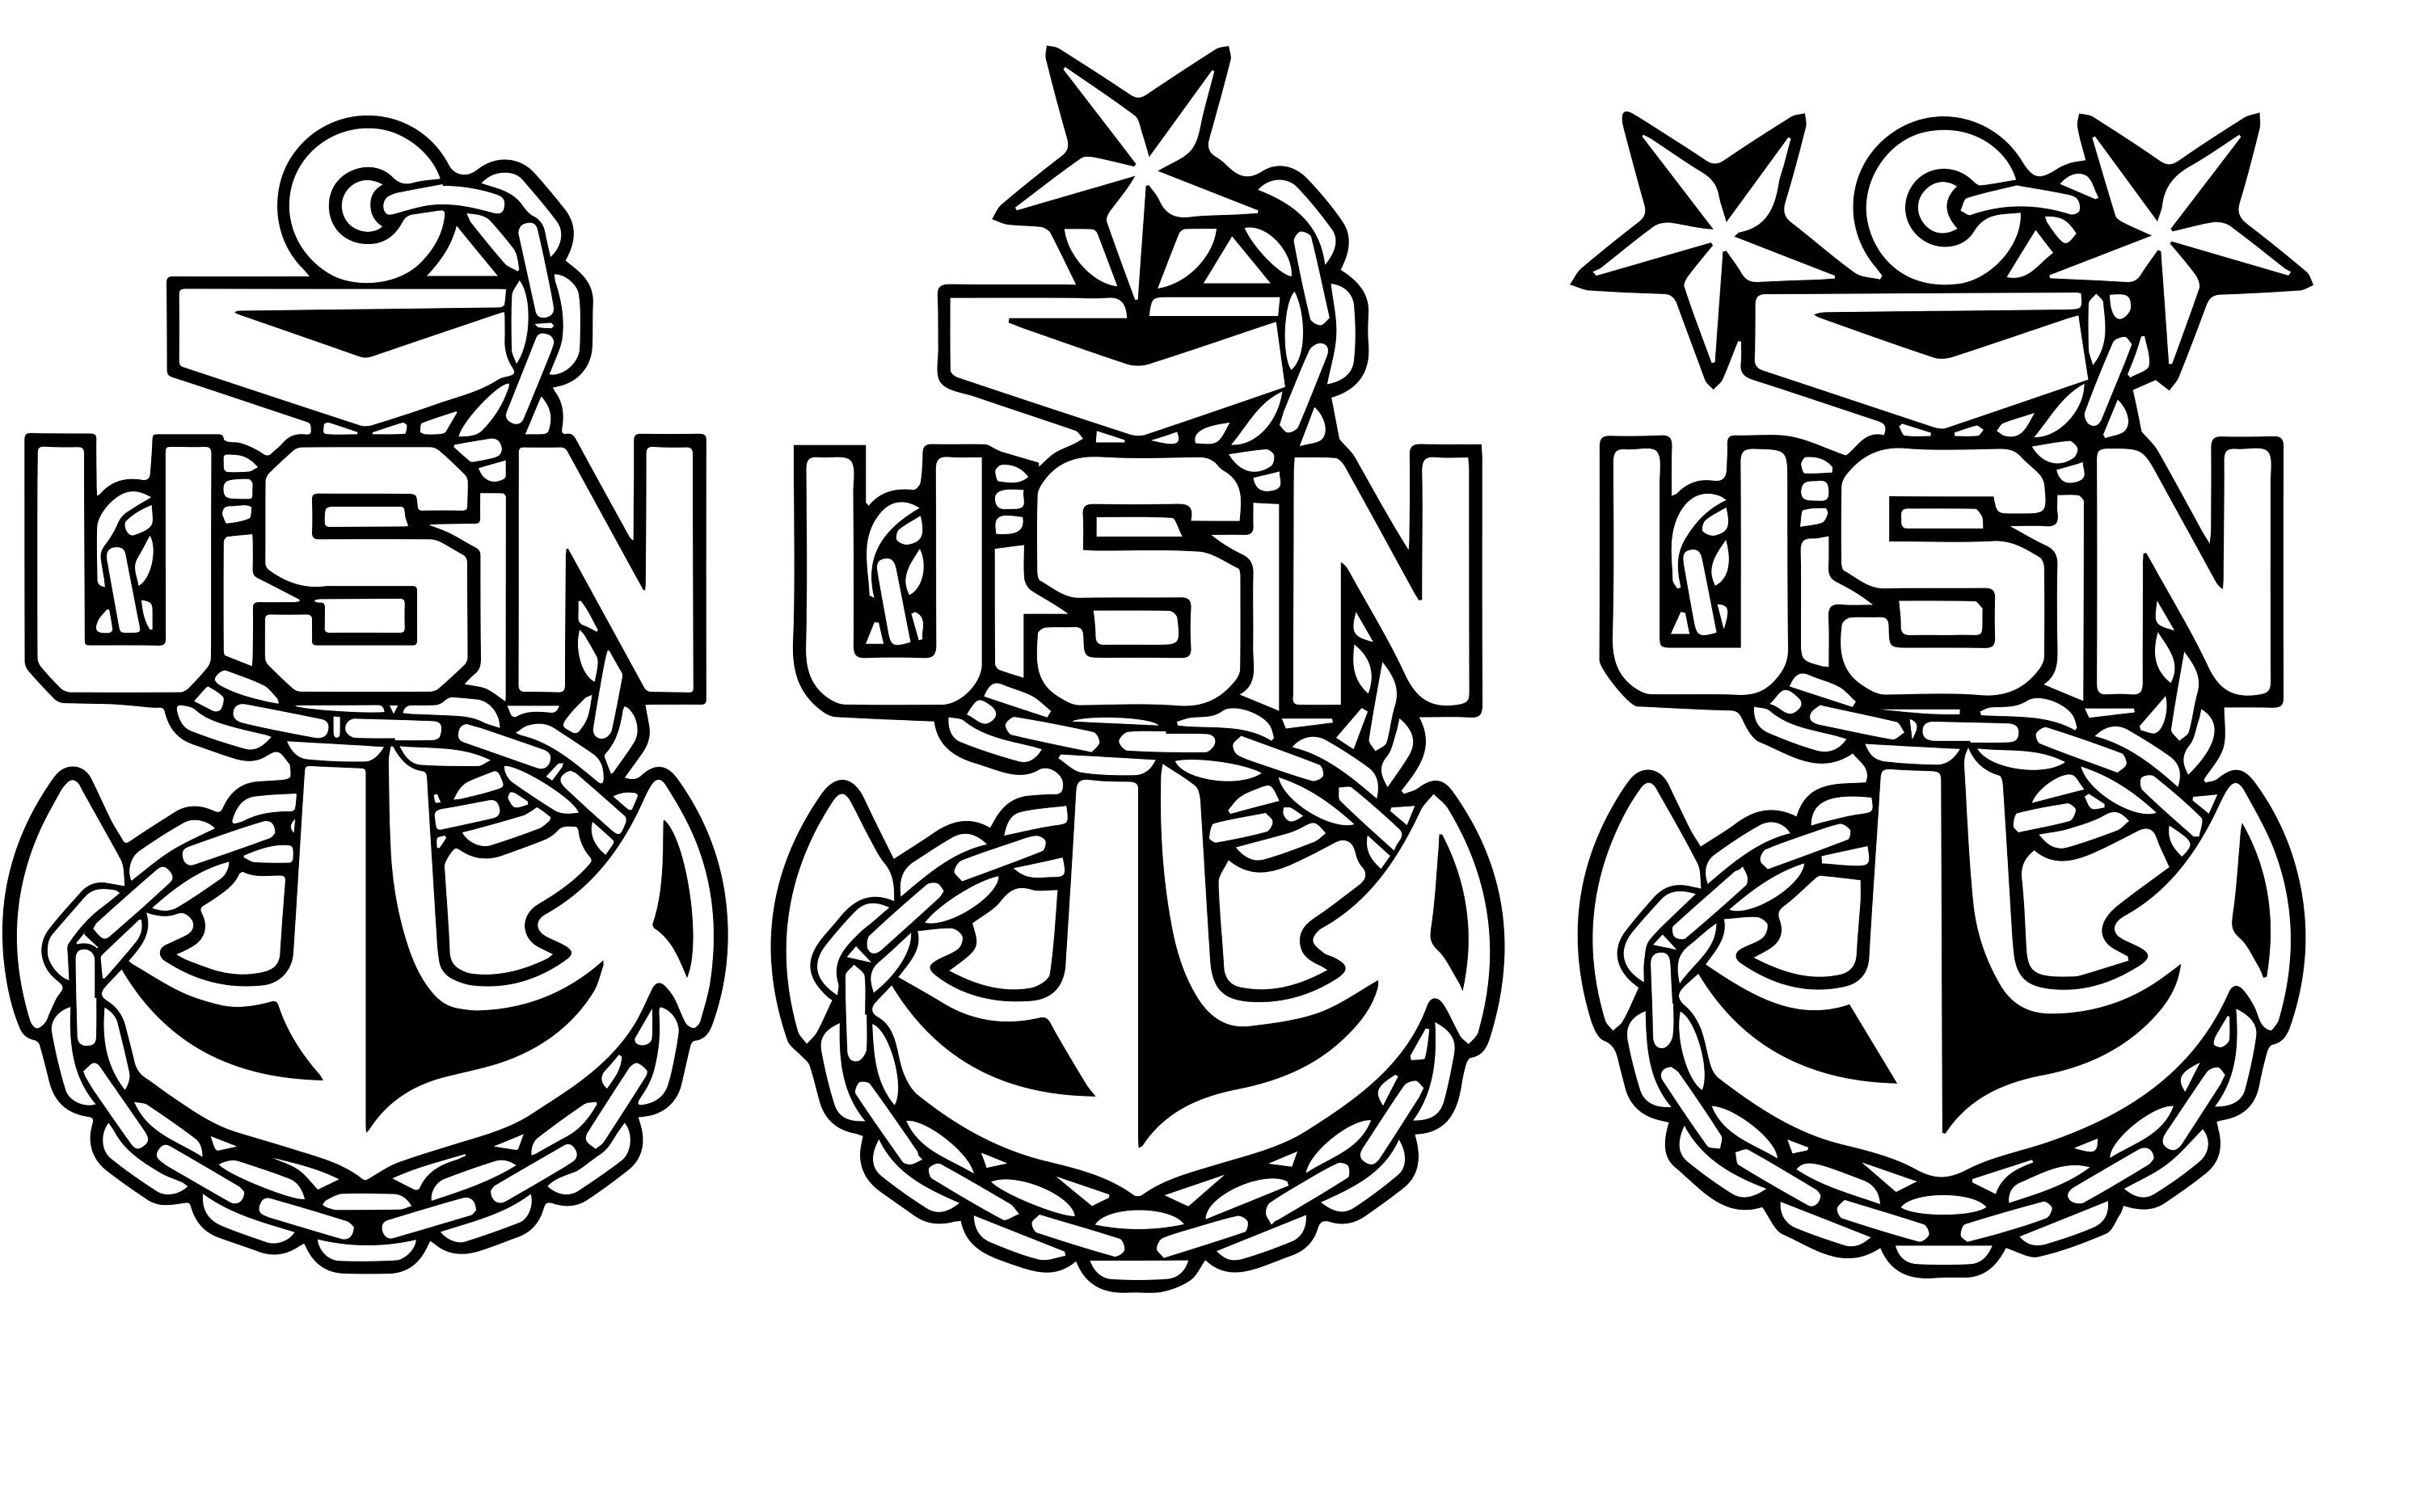 SVG Files US USN Chief Senior and Master Fouled Anchors for | Etsy